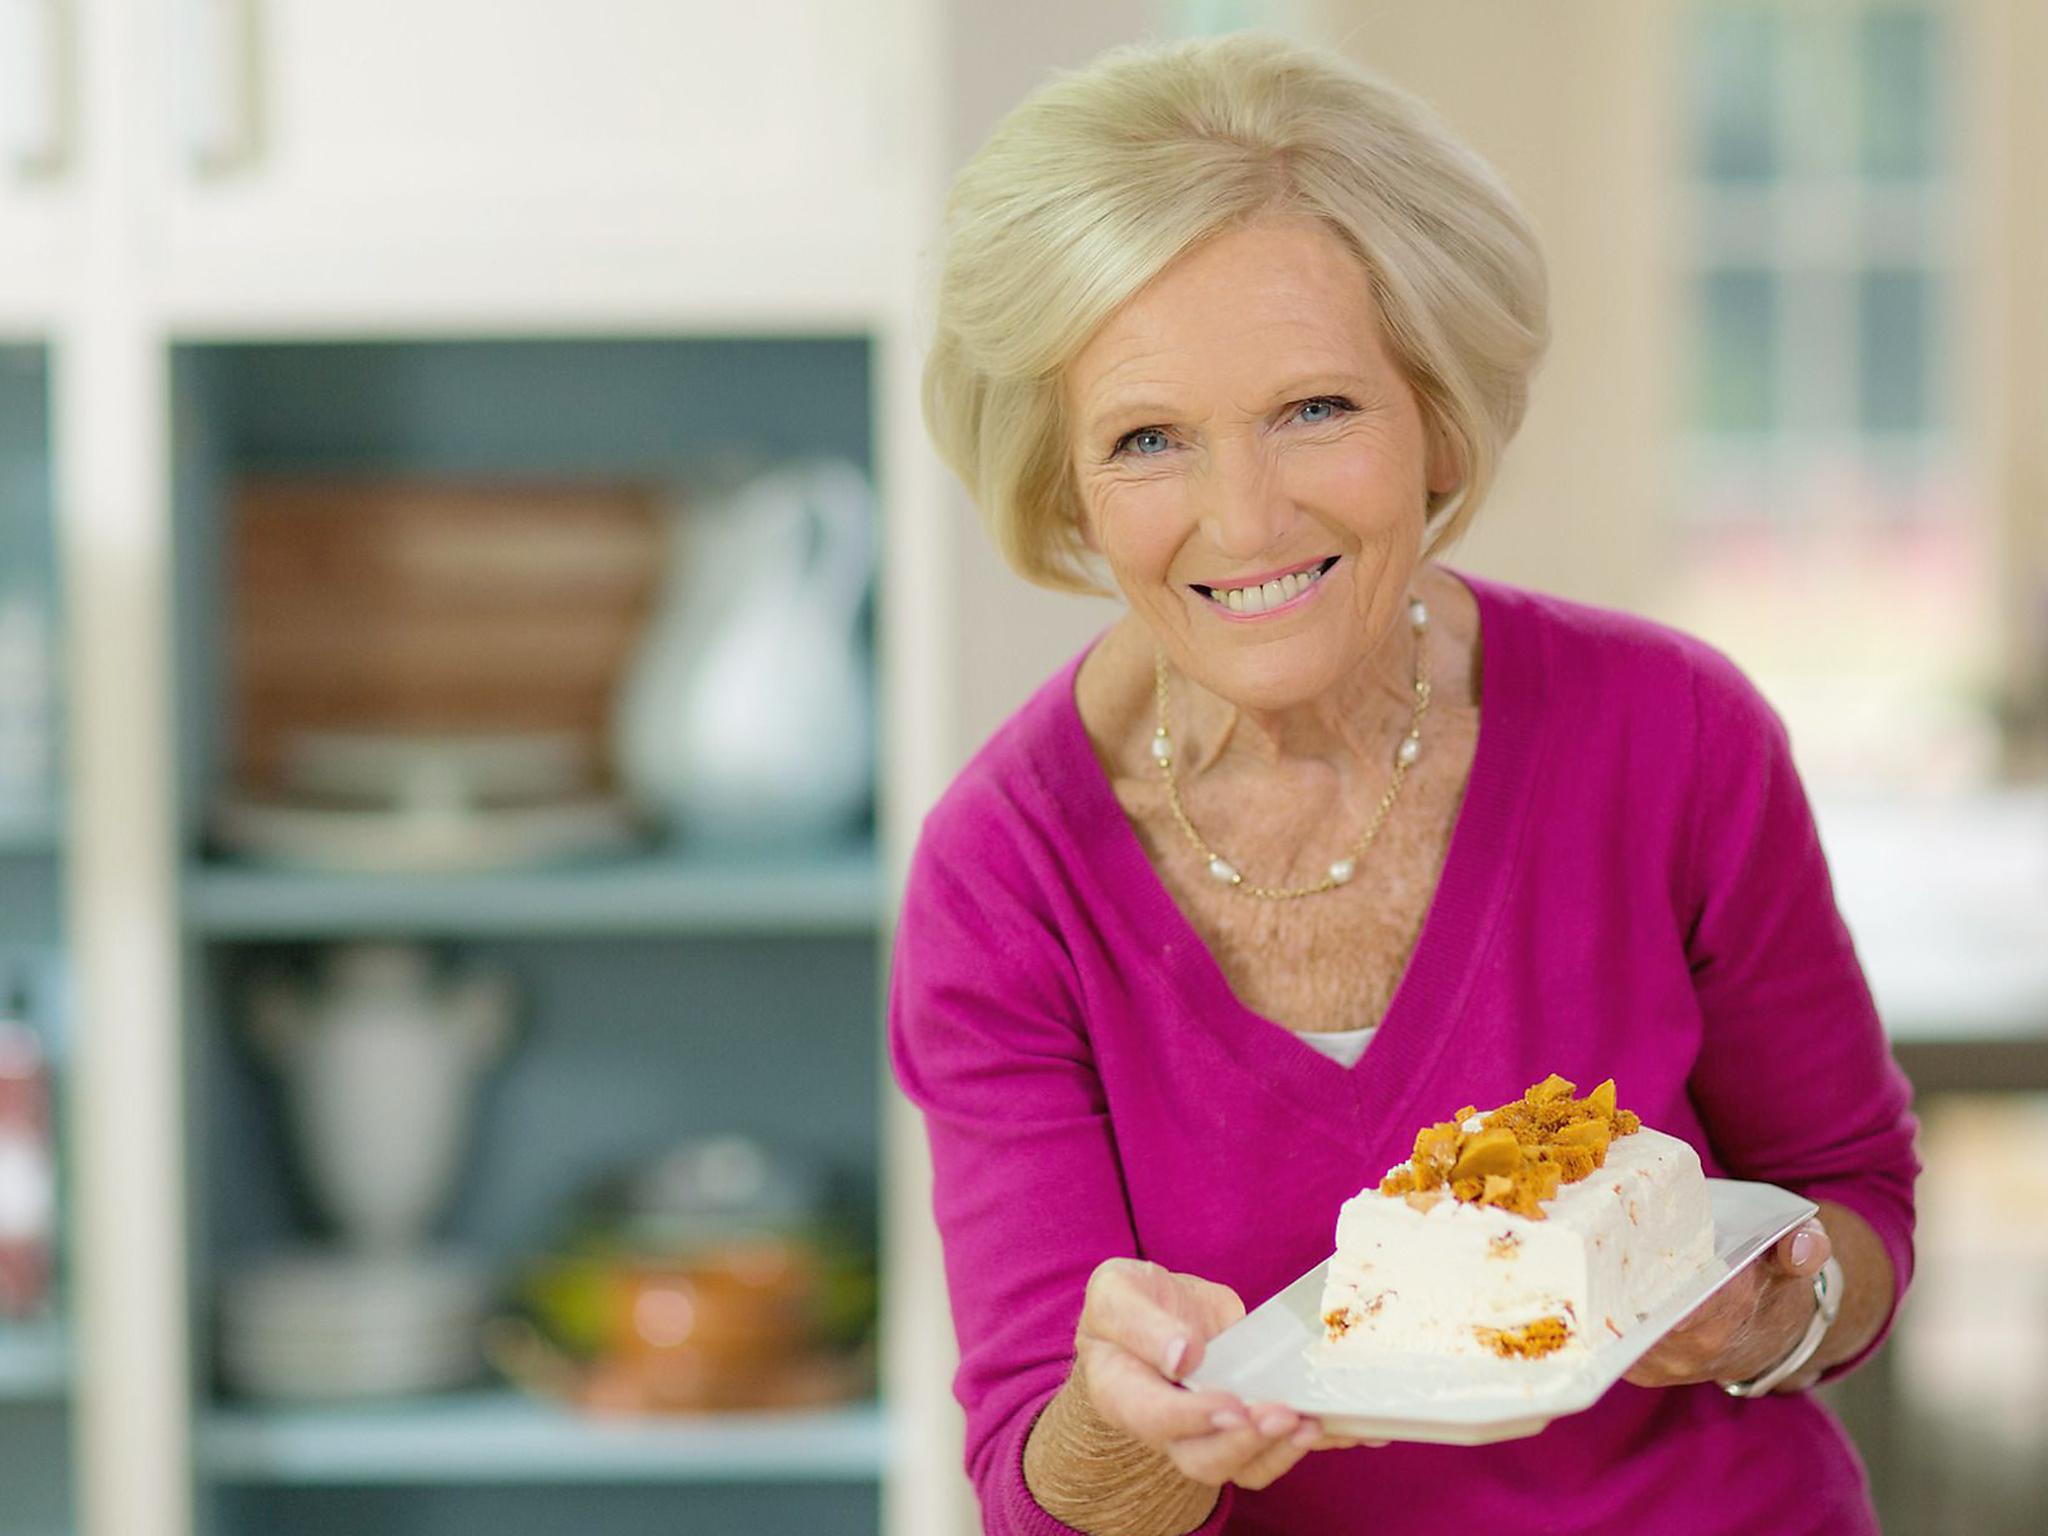 Mary Berry’s Paris training plays second fiddle to her Victorian sponge